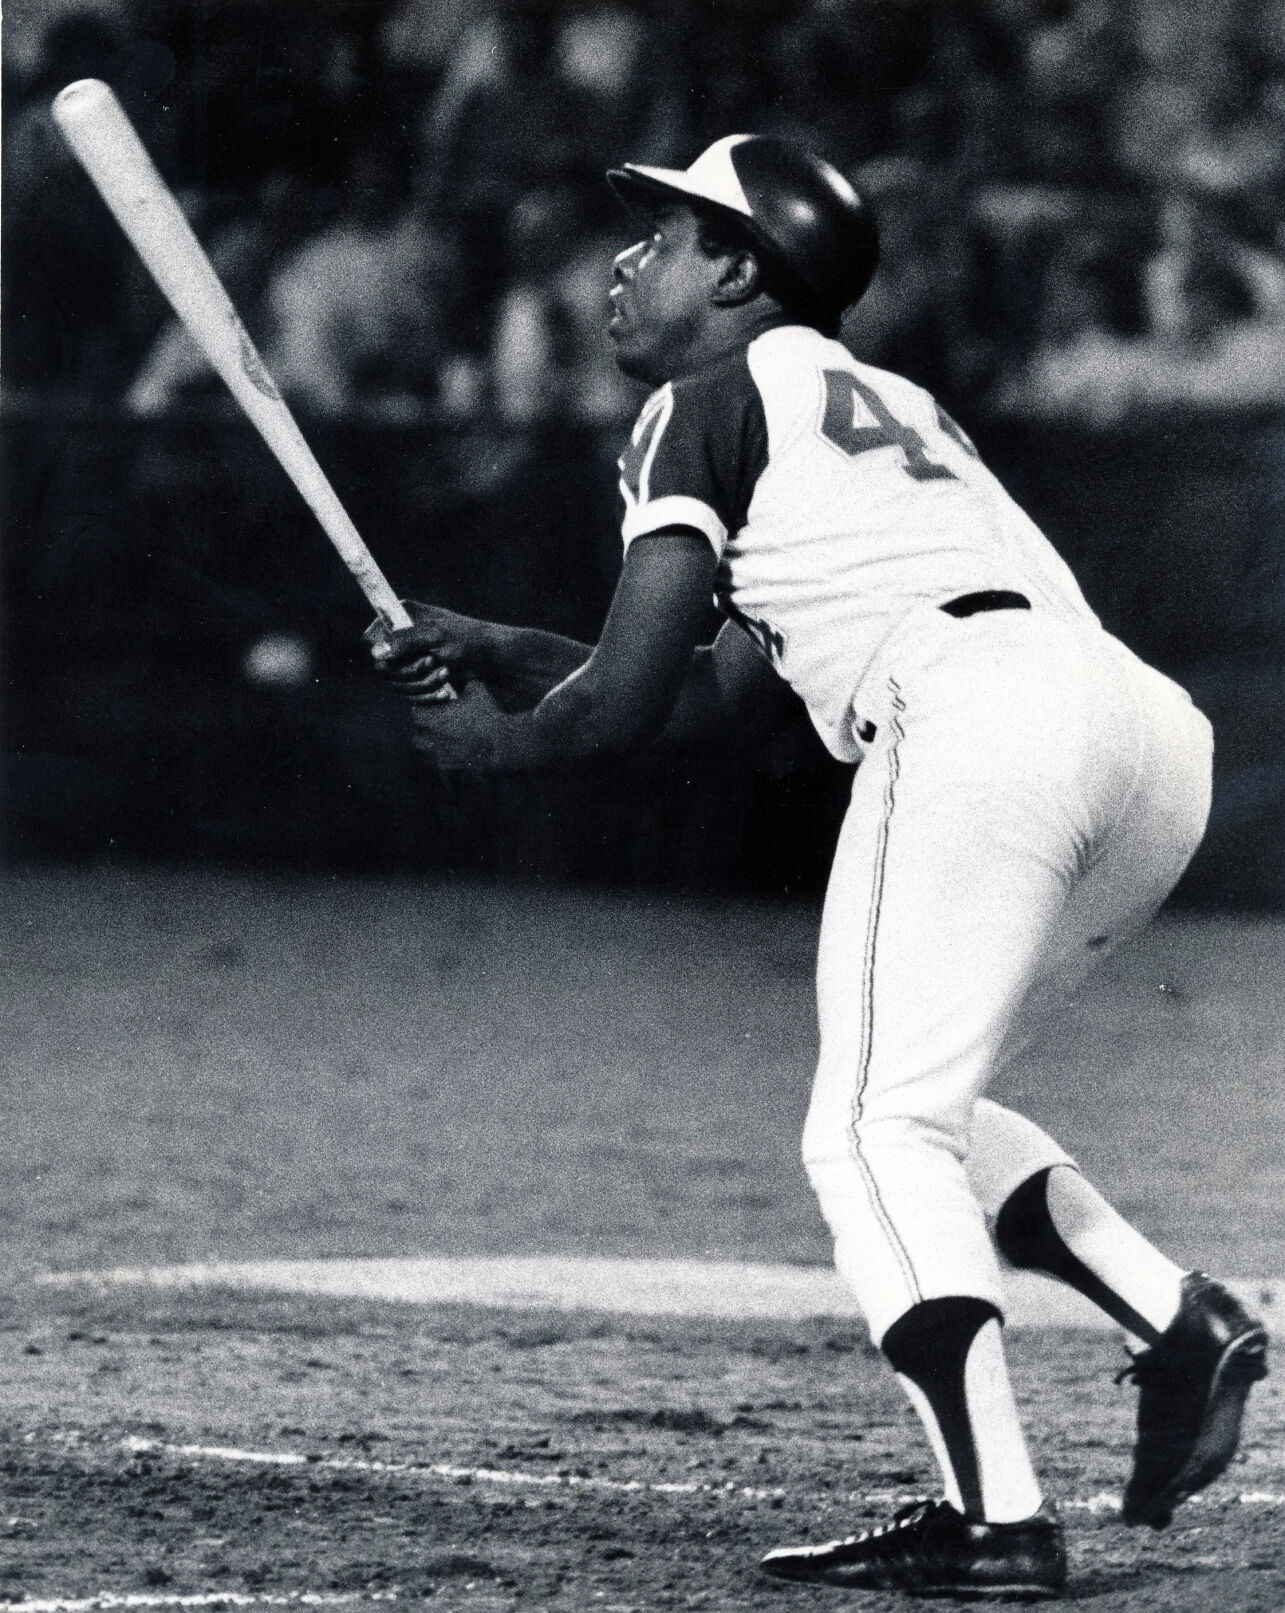 Hank Aaron death: Hall of Famer, Braves' home run king dies at 86 - Sports  Illustrated